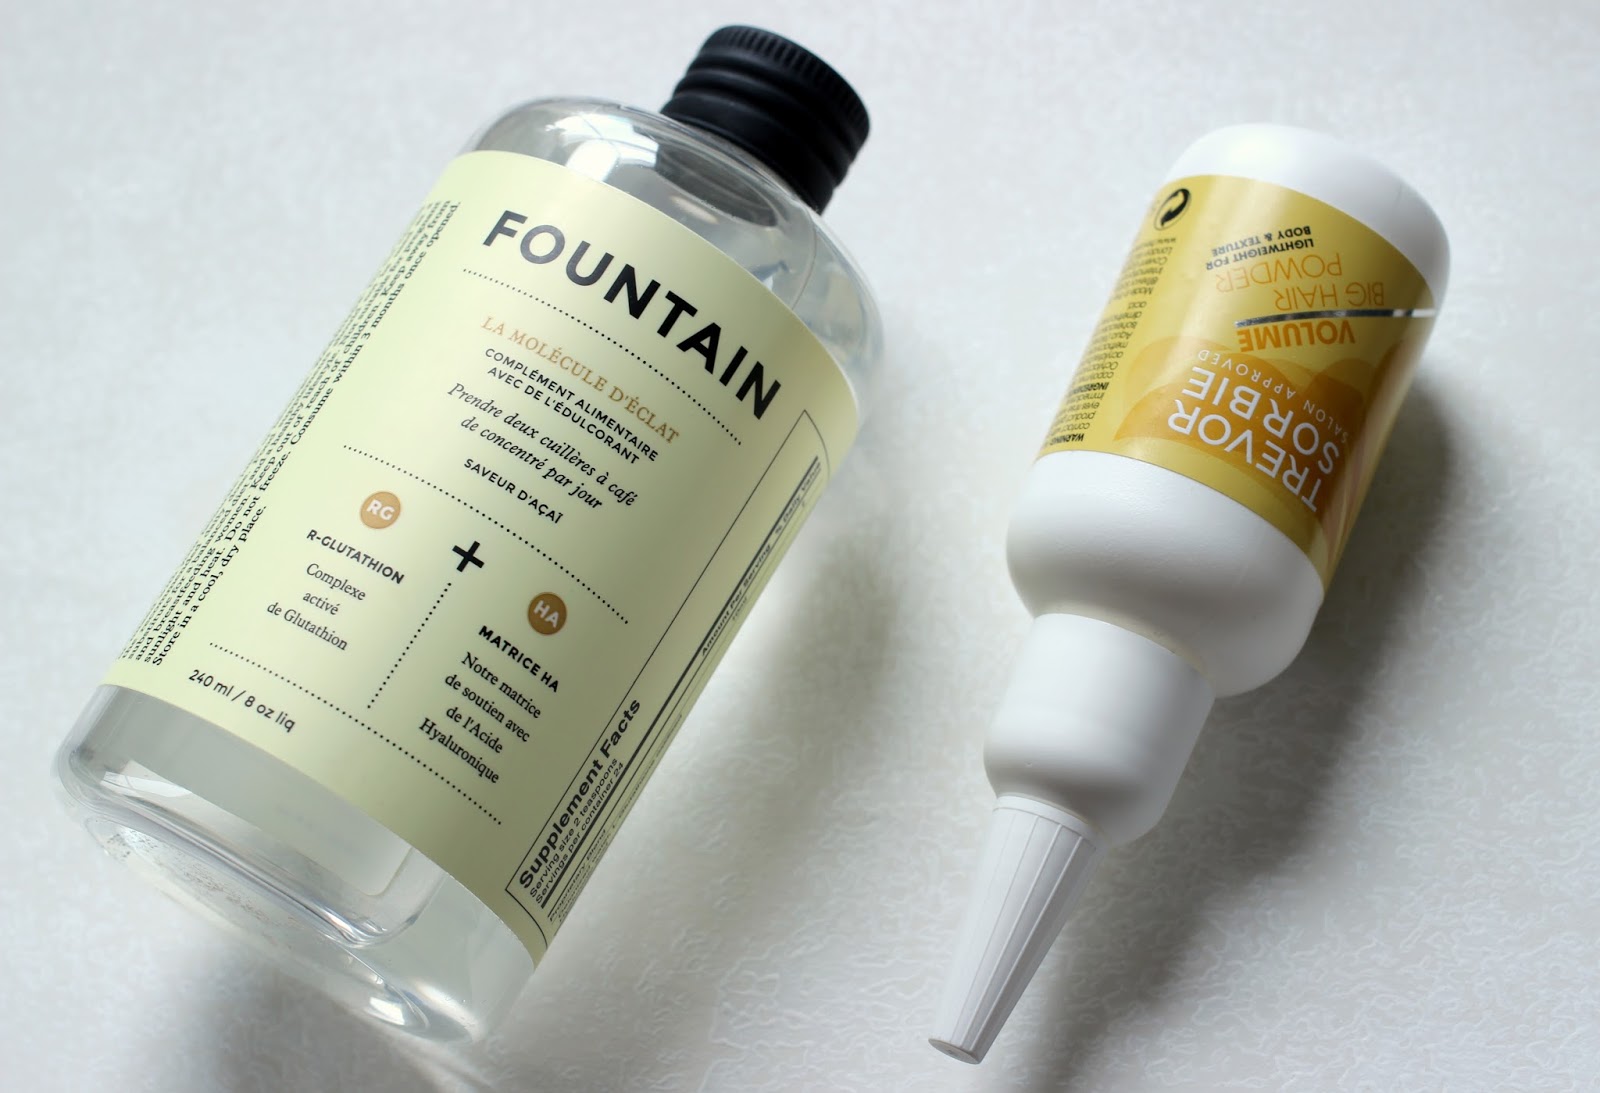 Fountain The Glow Molecule Review